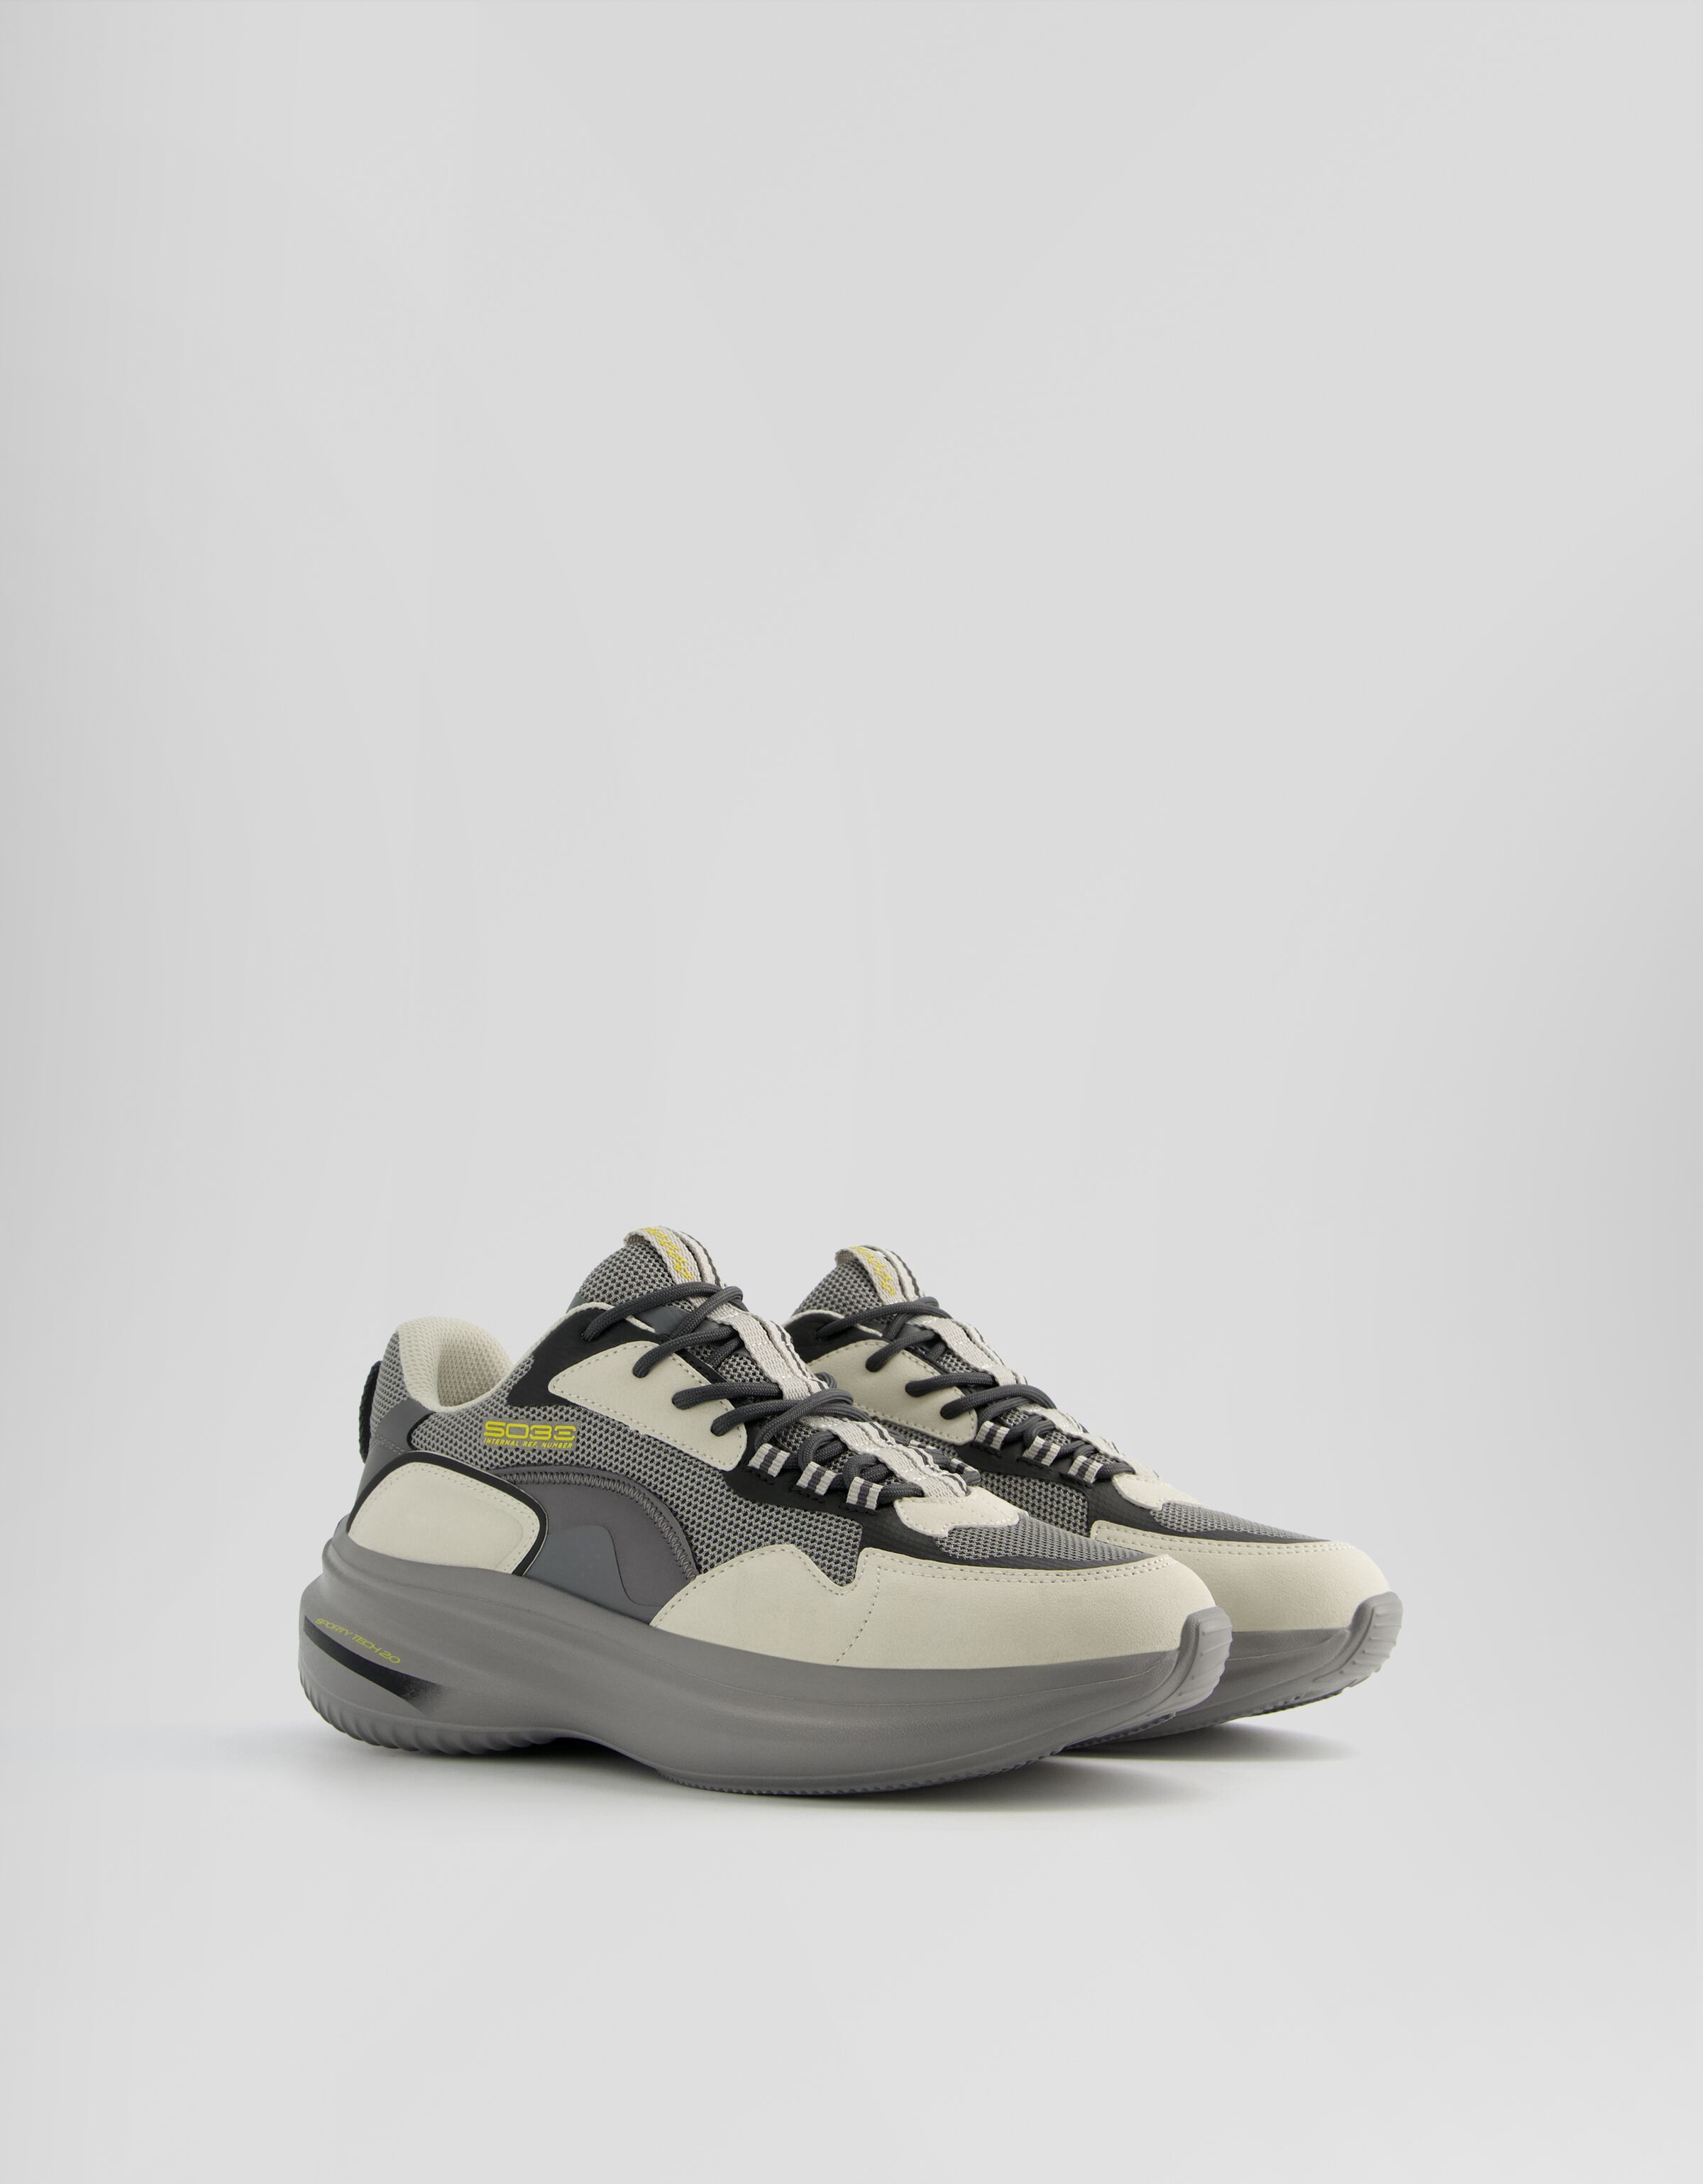 Sneakers with technical pieces detail - Shoes - Men | Bershka